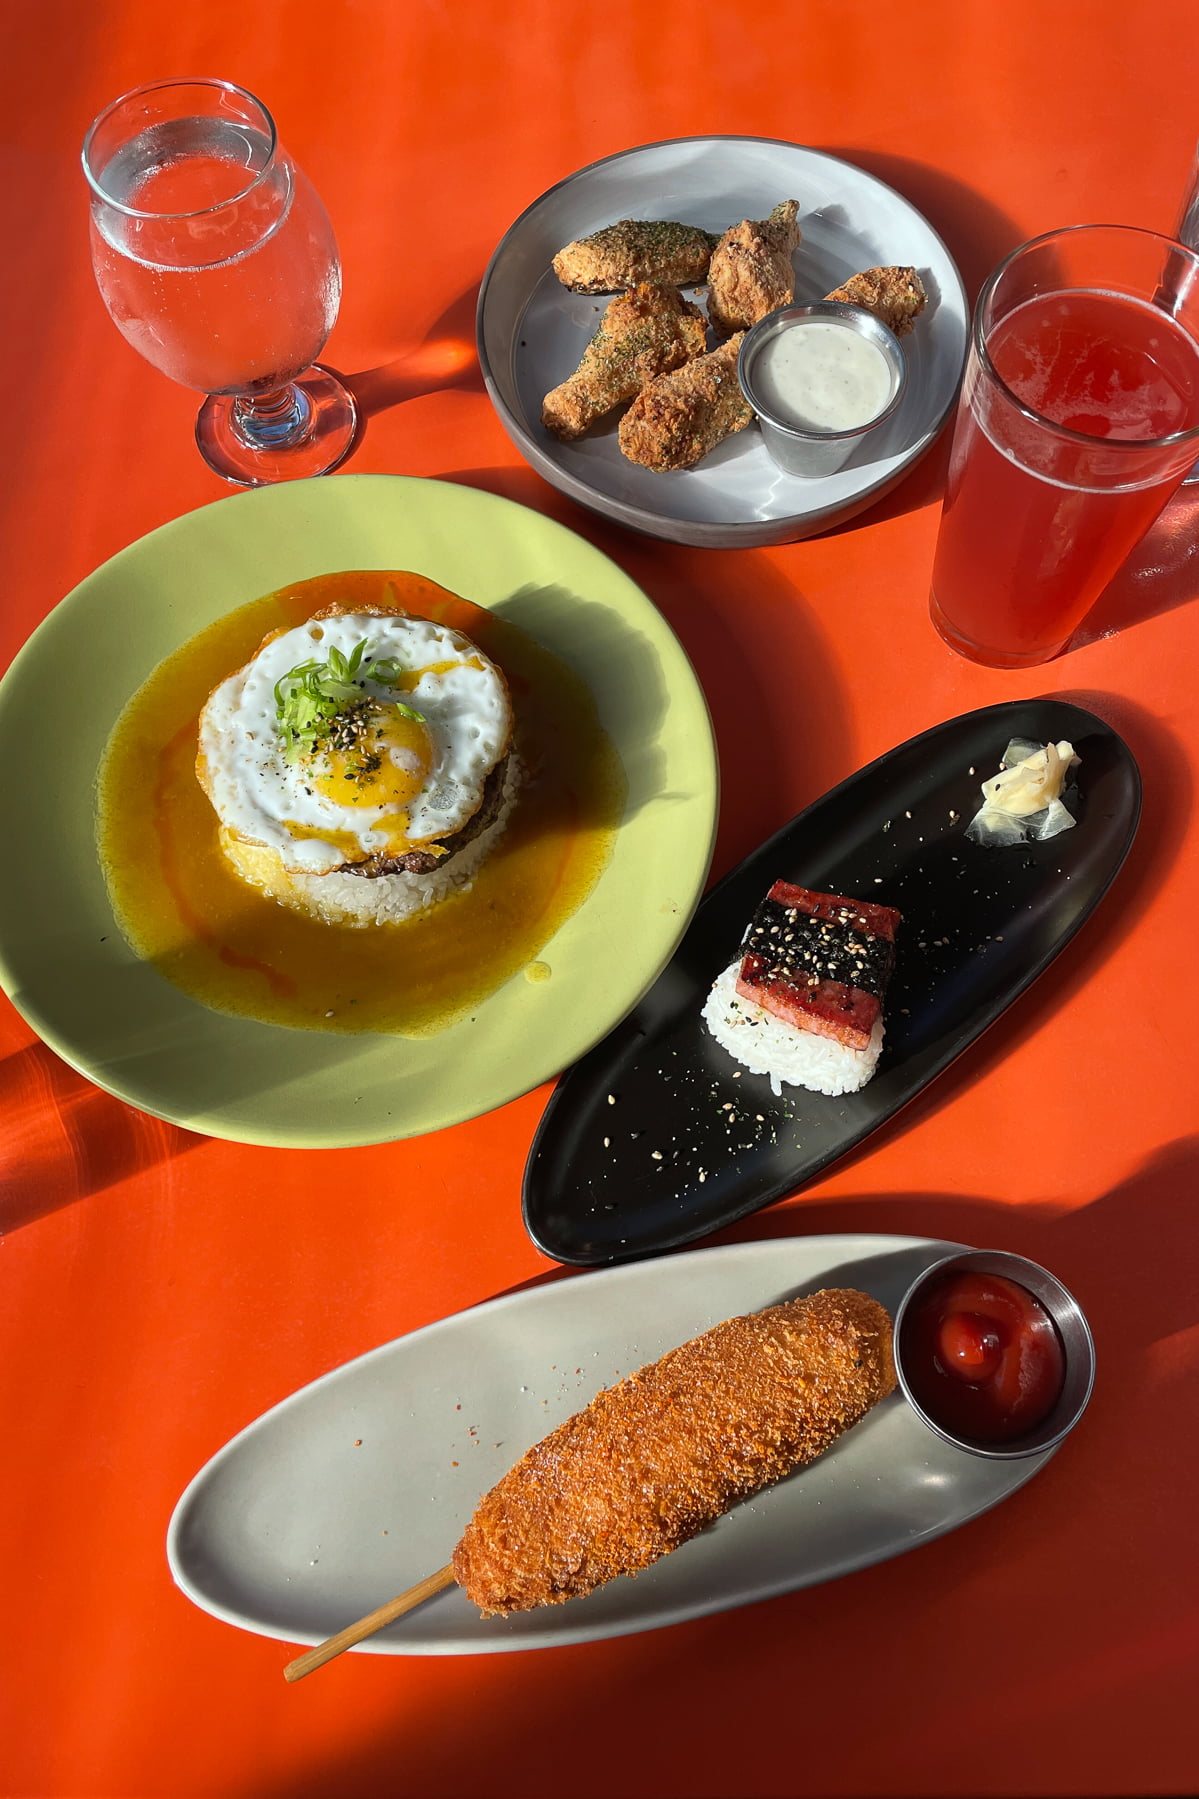 Popular dishes (including spam musubi, malasada corn dog, loco moco, and more) served at Outer Orbit.